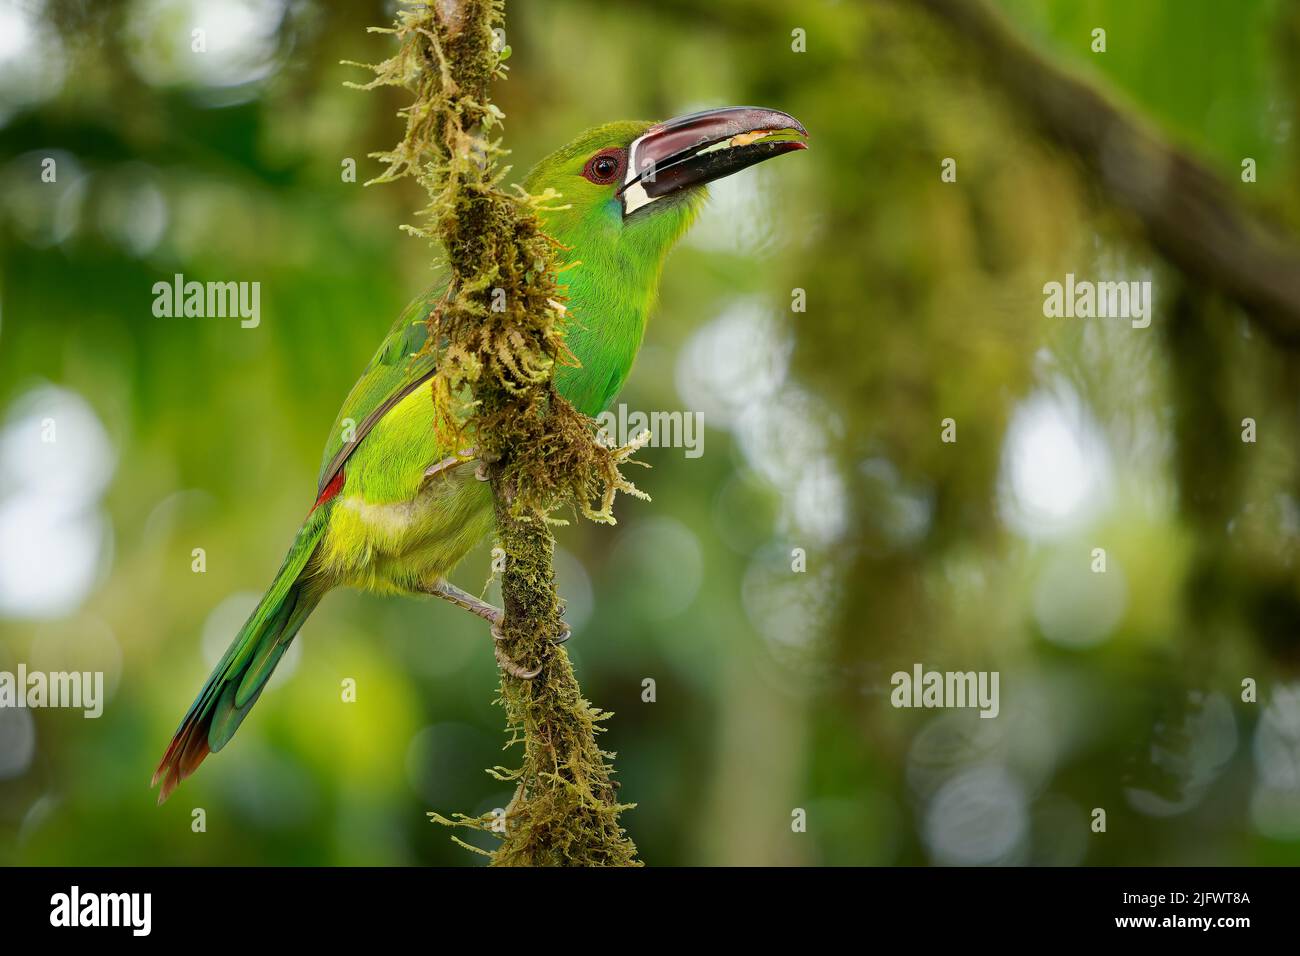 Crimson-rumped Toucanet - Aulacorhynchus haematopygus  bird in Ramphastidae found in humid Andean forests in Ecuador, Colombia and Venezuela, green pl Stock Photo